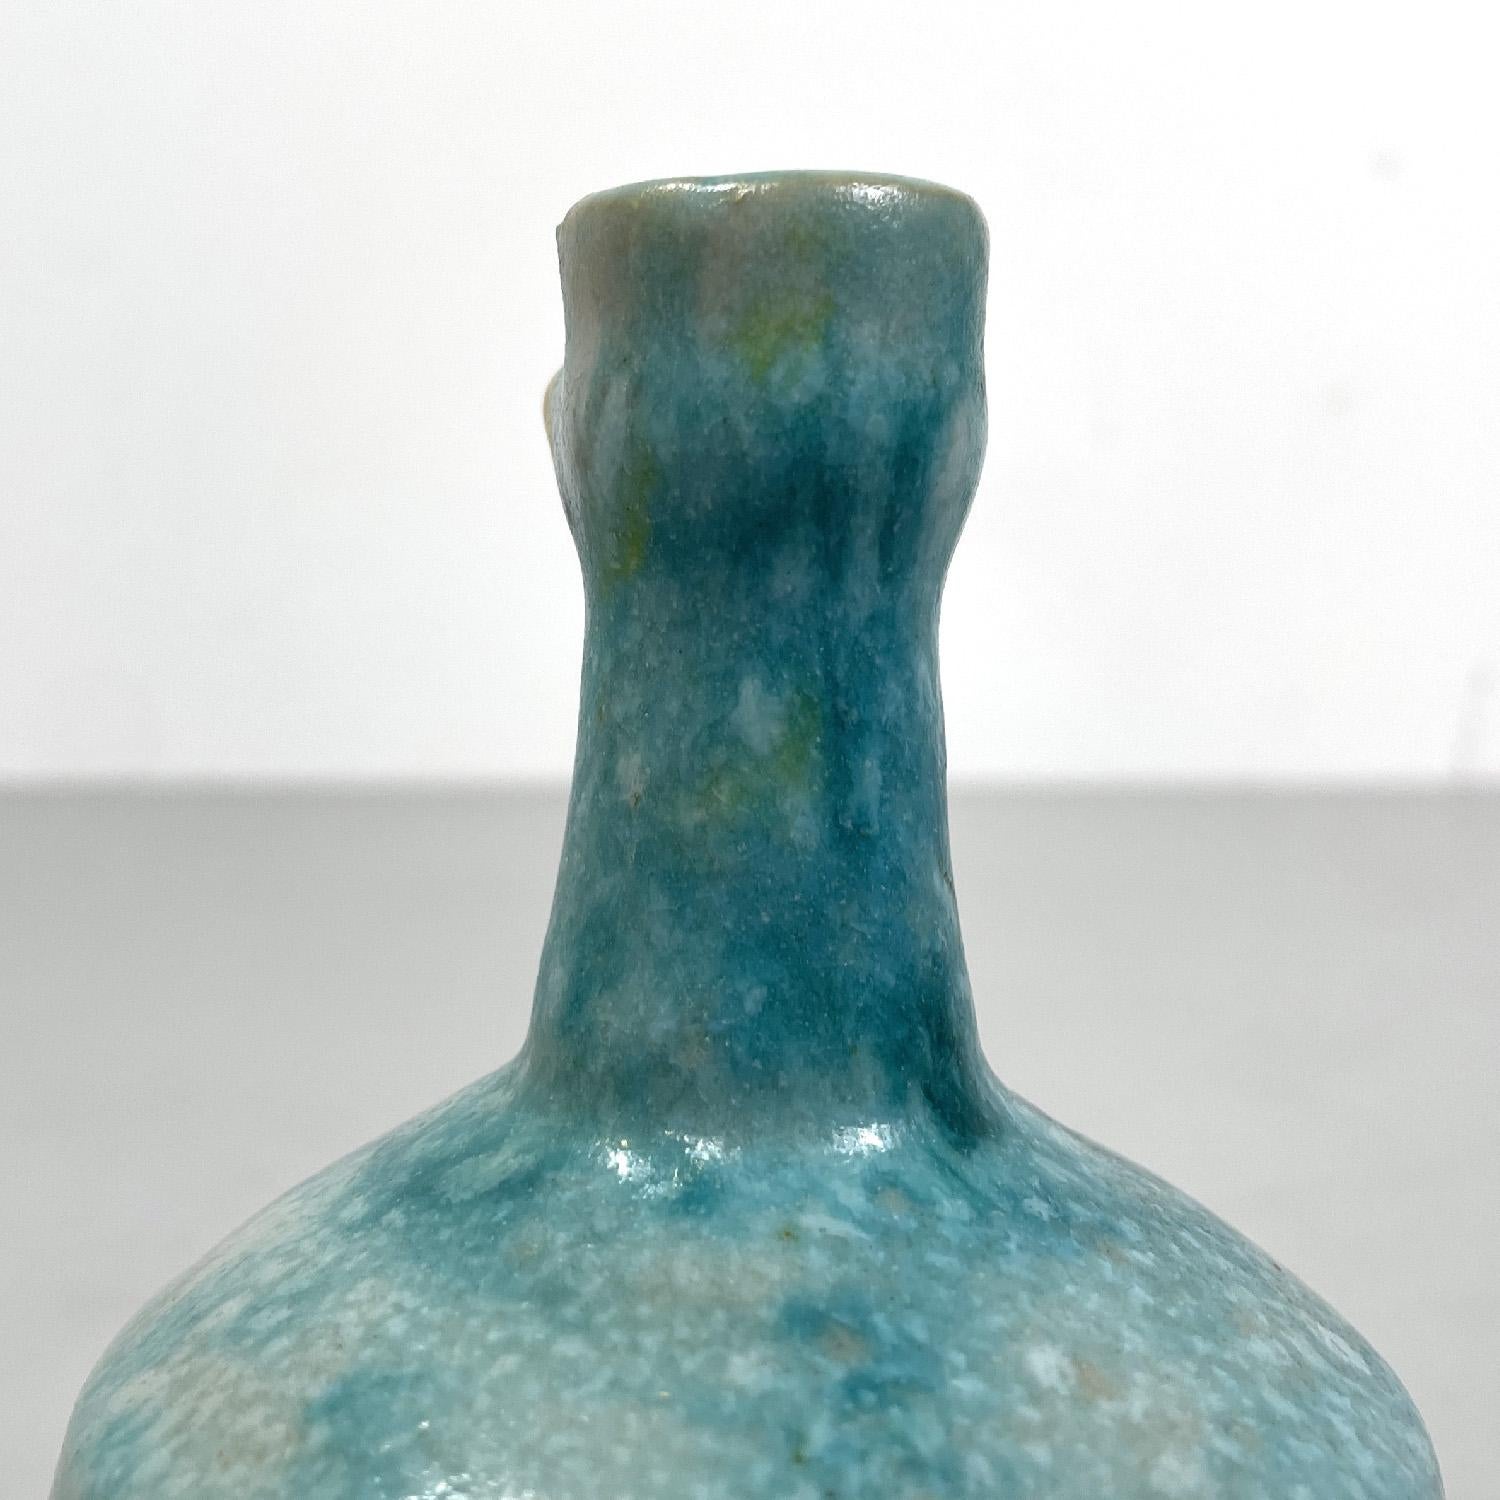 Italian modern light blue and yellow ceramic vase by Bruno Gambone, 1970s For Sale 3